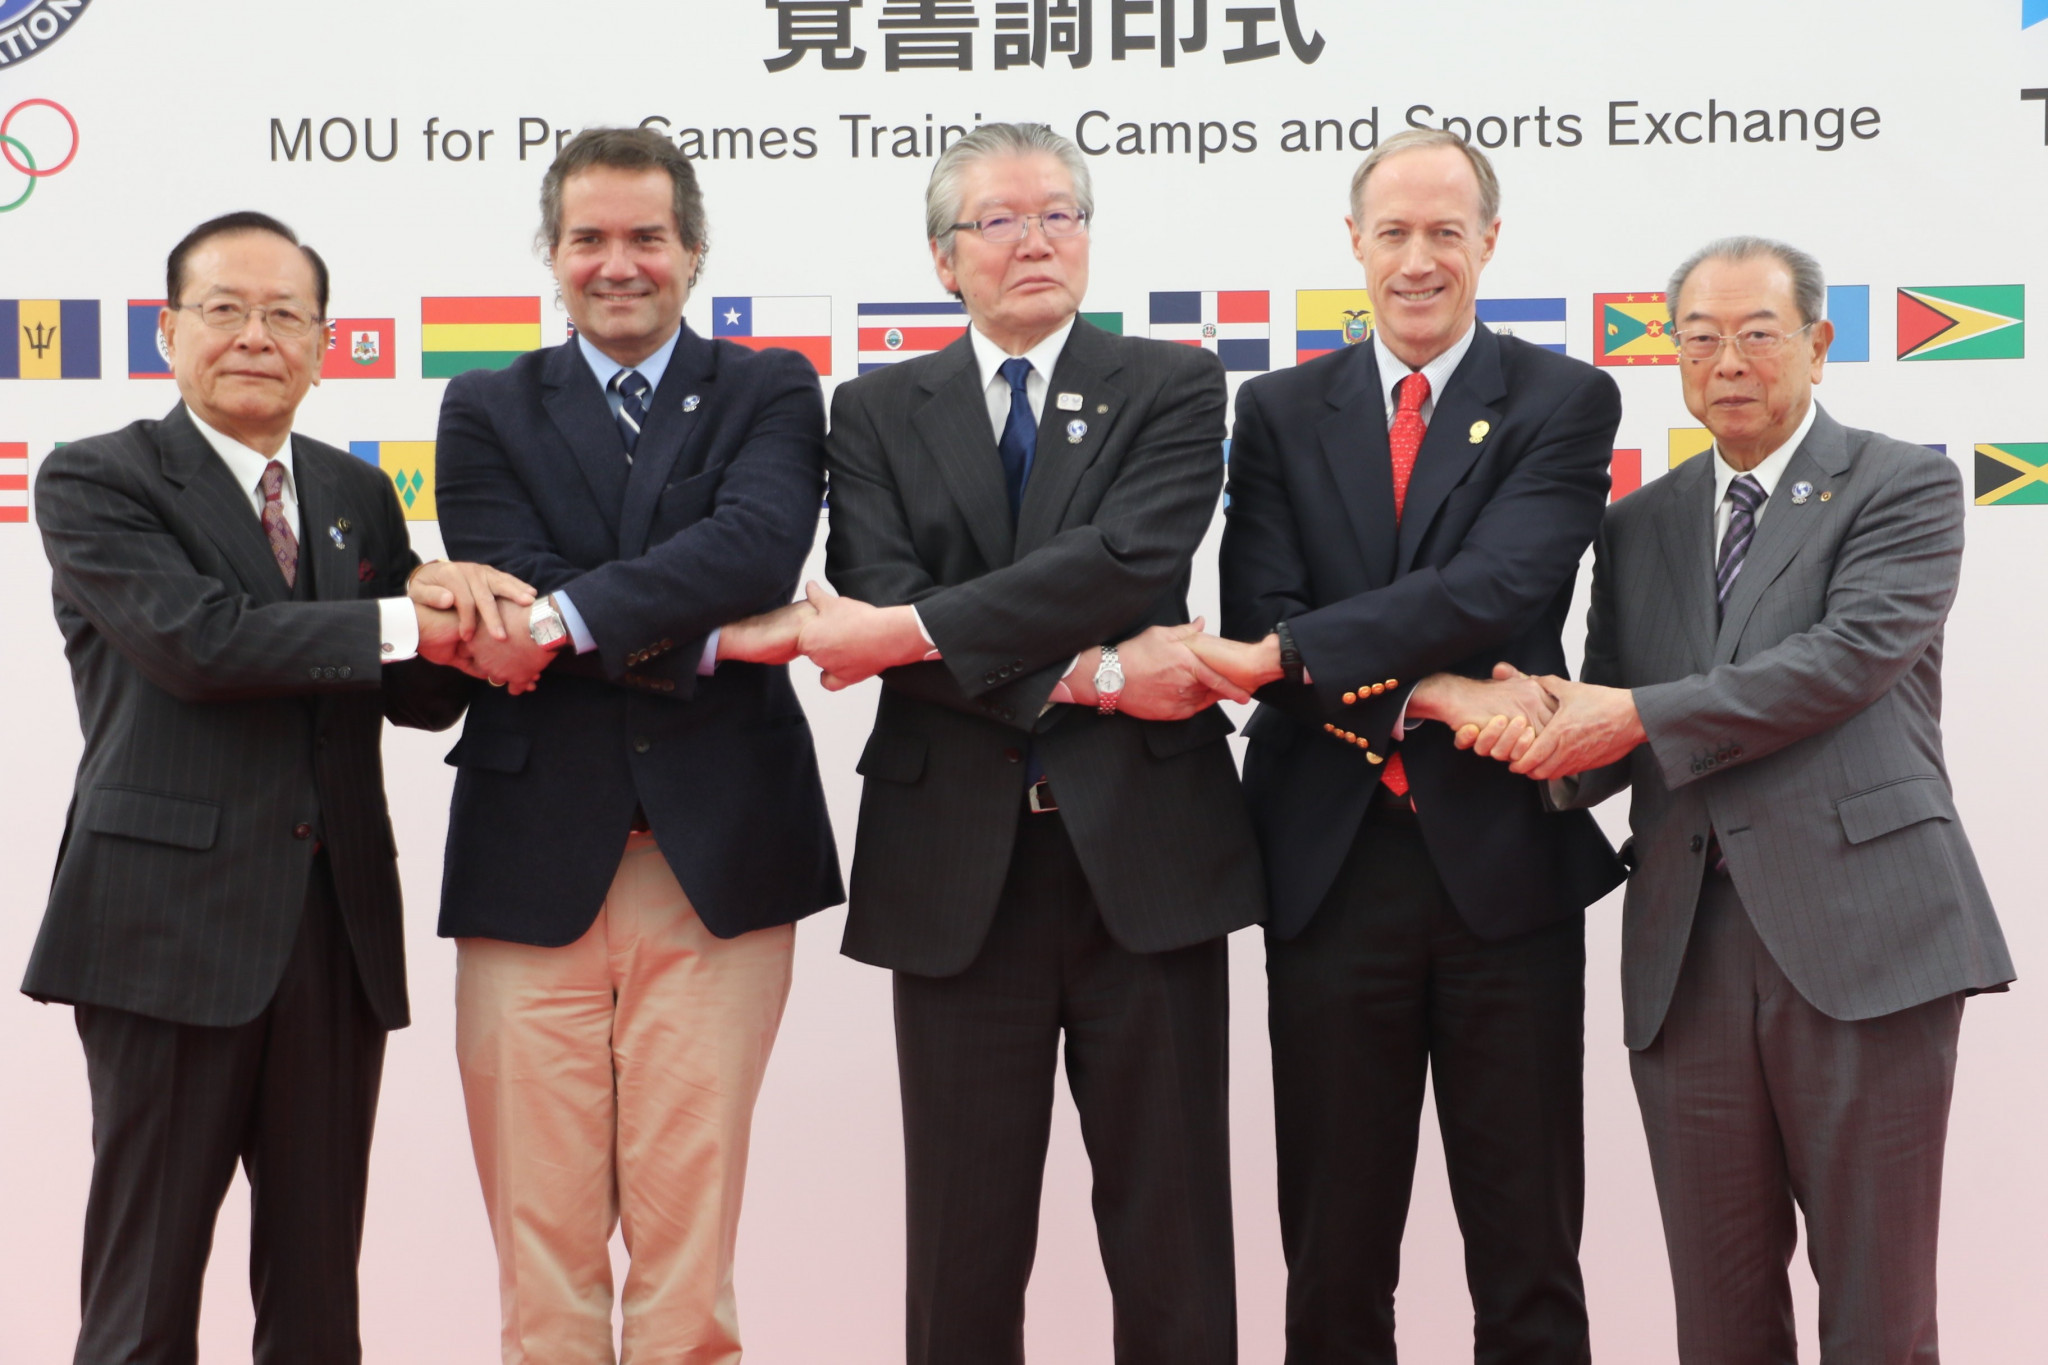 Panam Sports sign agreement for Americas training camp in Tachikawa for Tokyo 2020